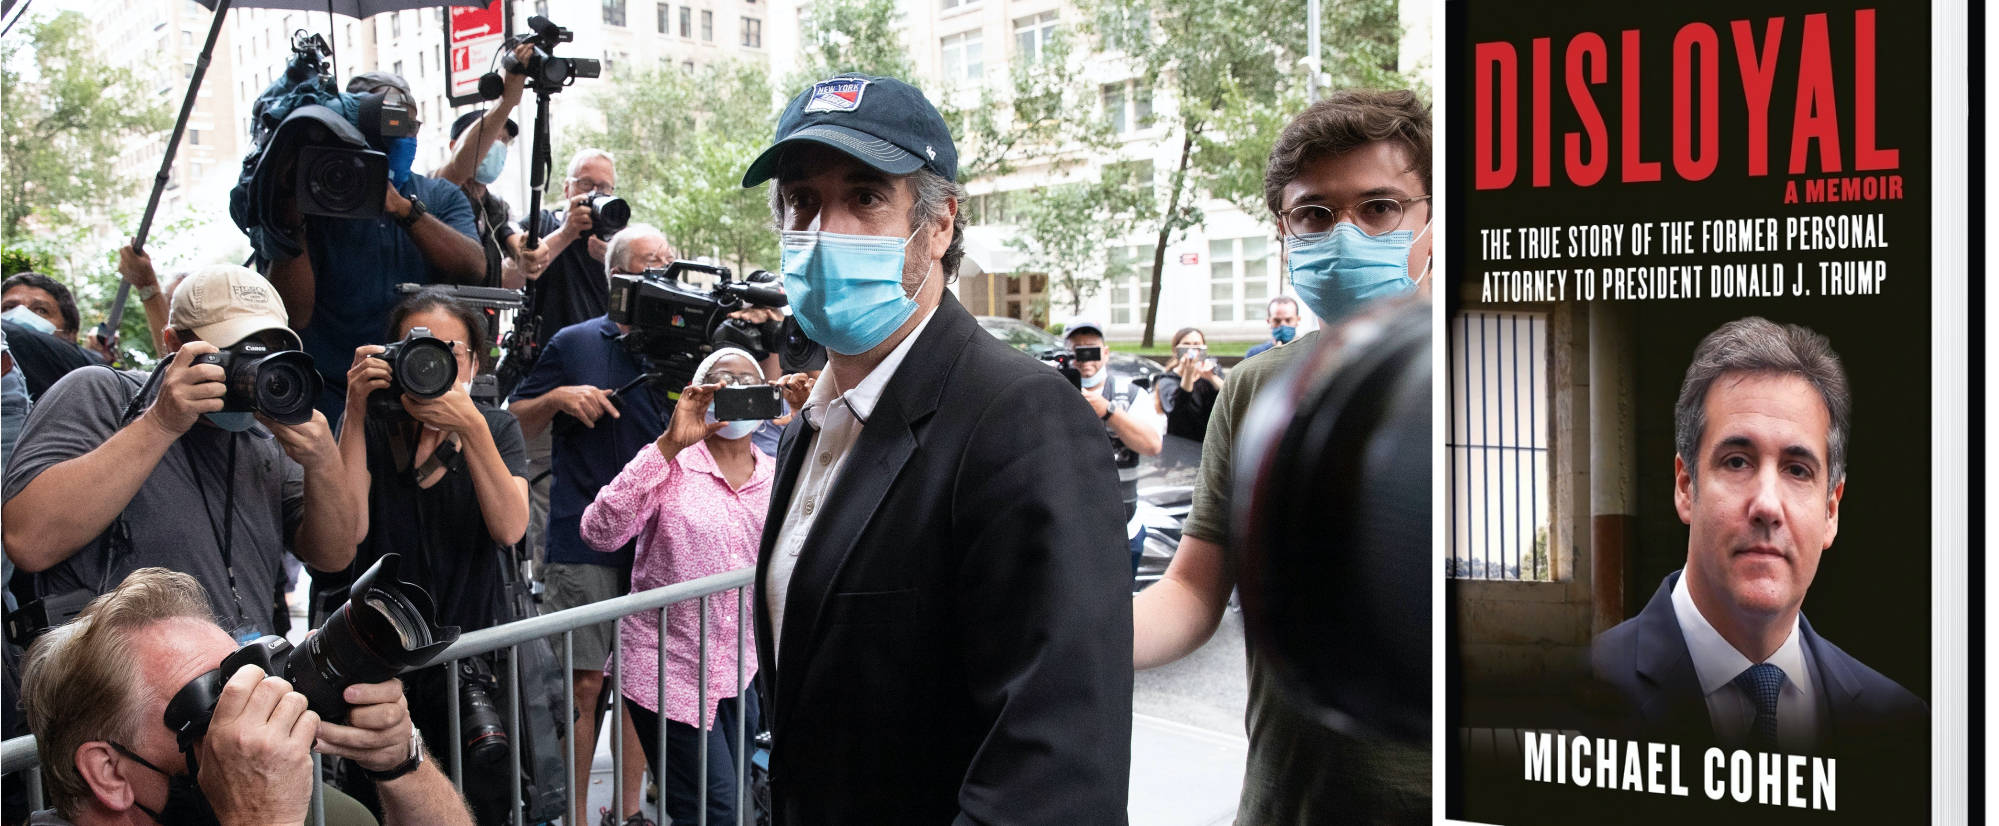 Michael Cohen, President Donald Trump's former personal attorney, returns to his New York apartment after being released from prison, July 24, 2020. District Judge Alvin Hellerstein ordered Cohen released on parole, saying he believes the government retaliated against him for writing a book about Trump. (AP Photo/Mark Lennihan); book cover from Michael Cohen's website.